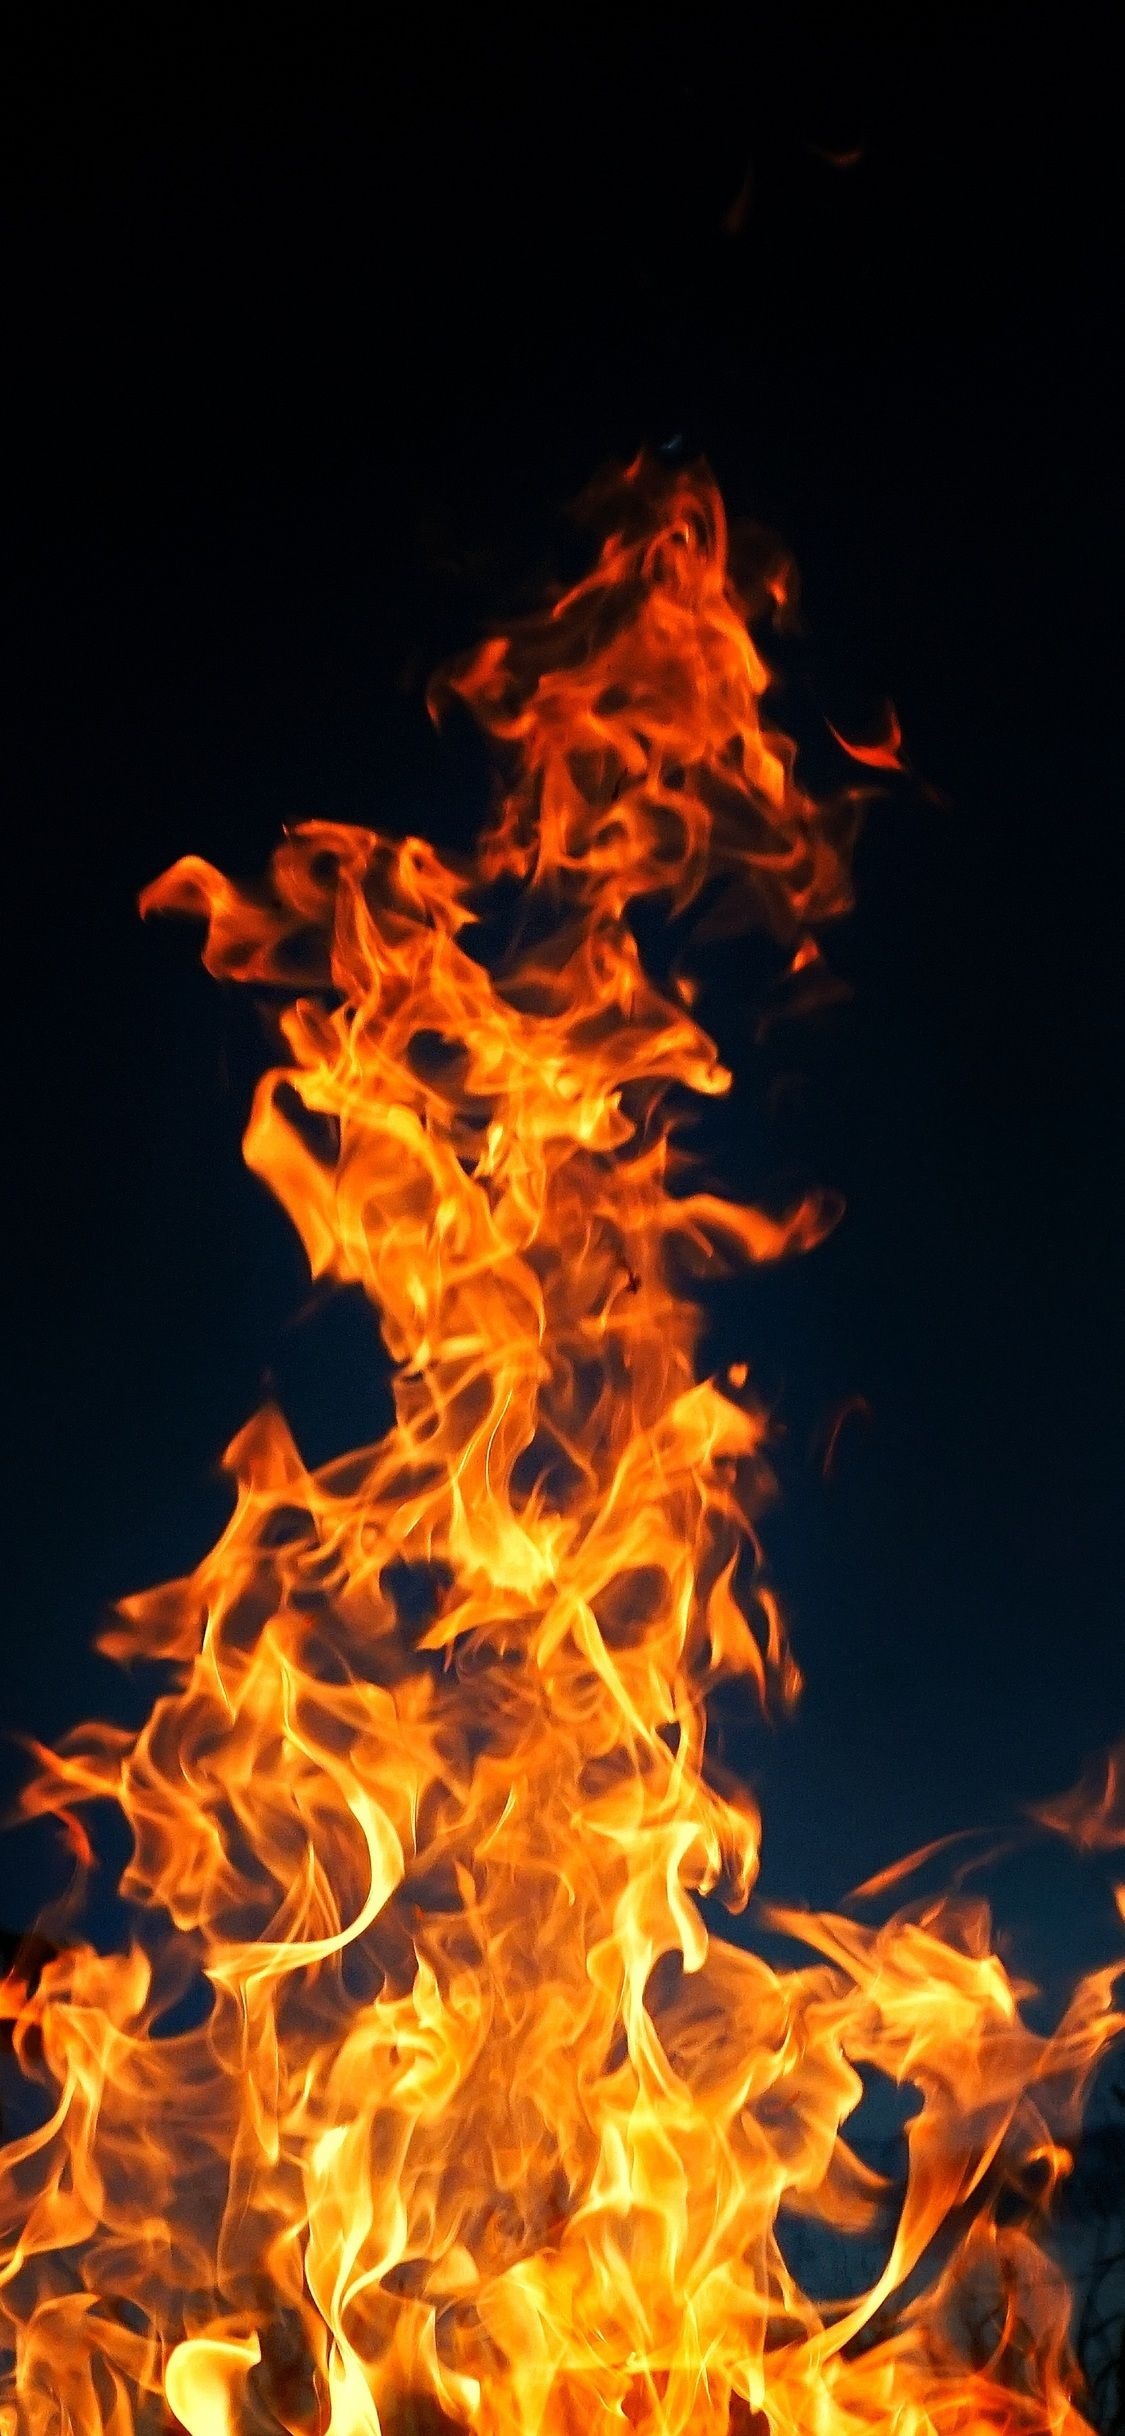 iPhone fire, Flaming backgrounds, Burning wallpapers, Sizzling visuals, Ignited screens, 1130x2440 HD Handy